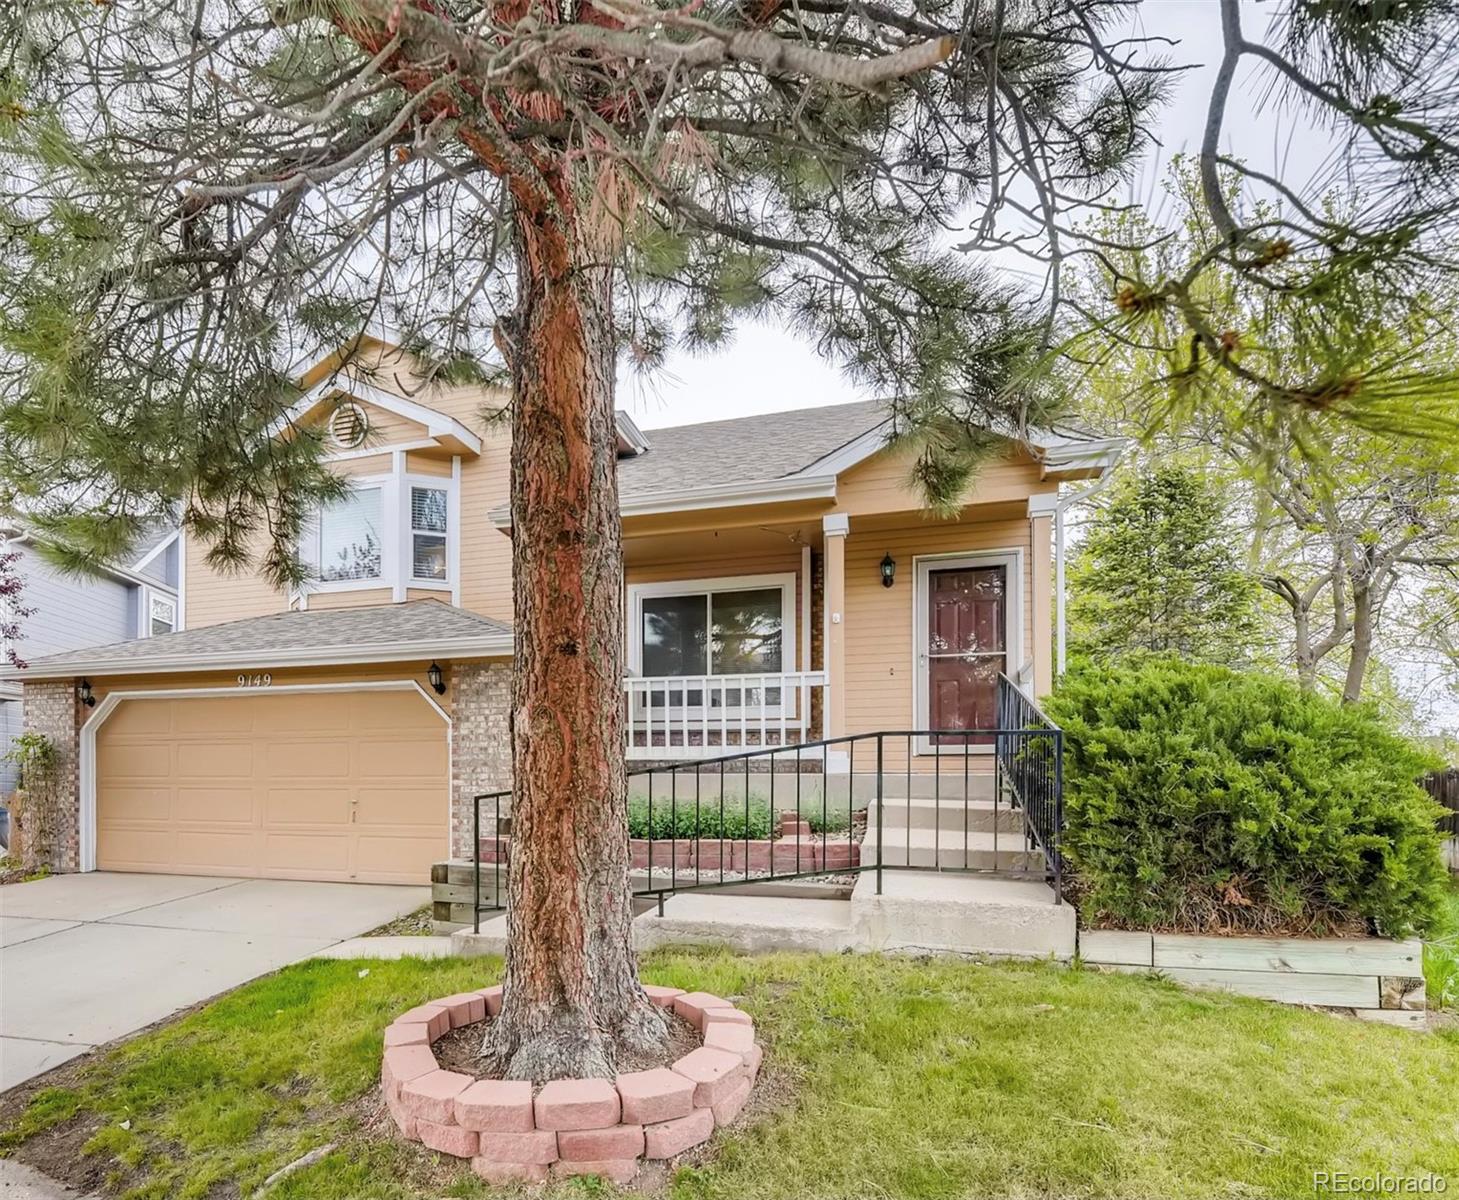 Report Image for 9149 W Maryland Place,Lakewood, Colorado